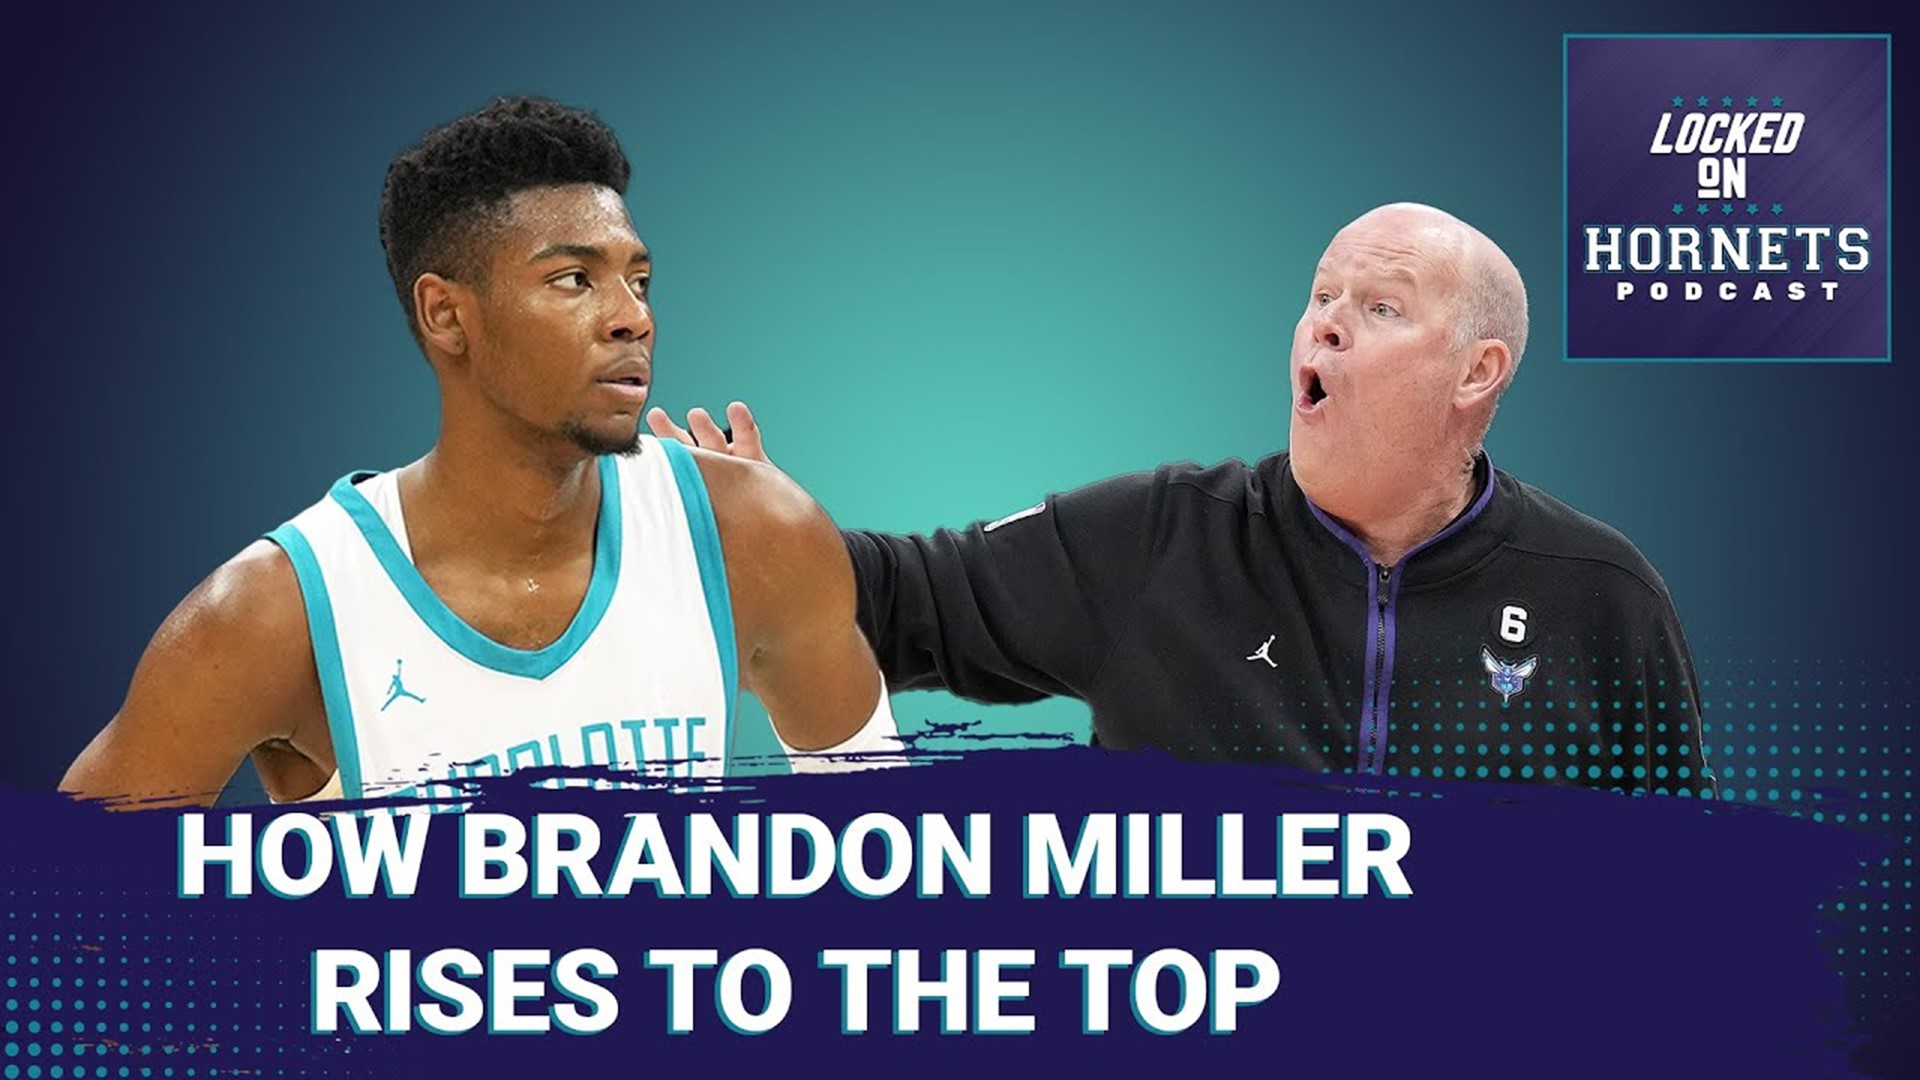 Preview/Game Details: Brandon Miller and the Hornets face reeling